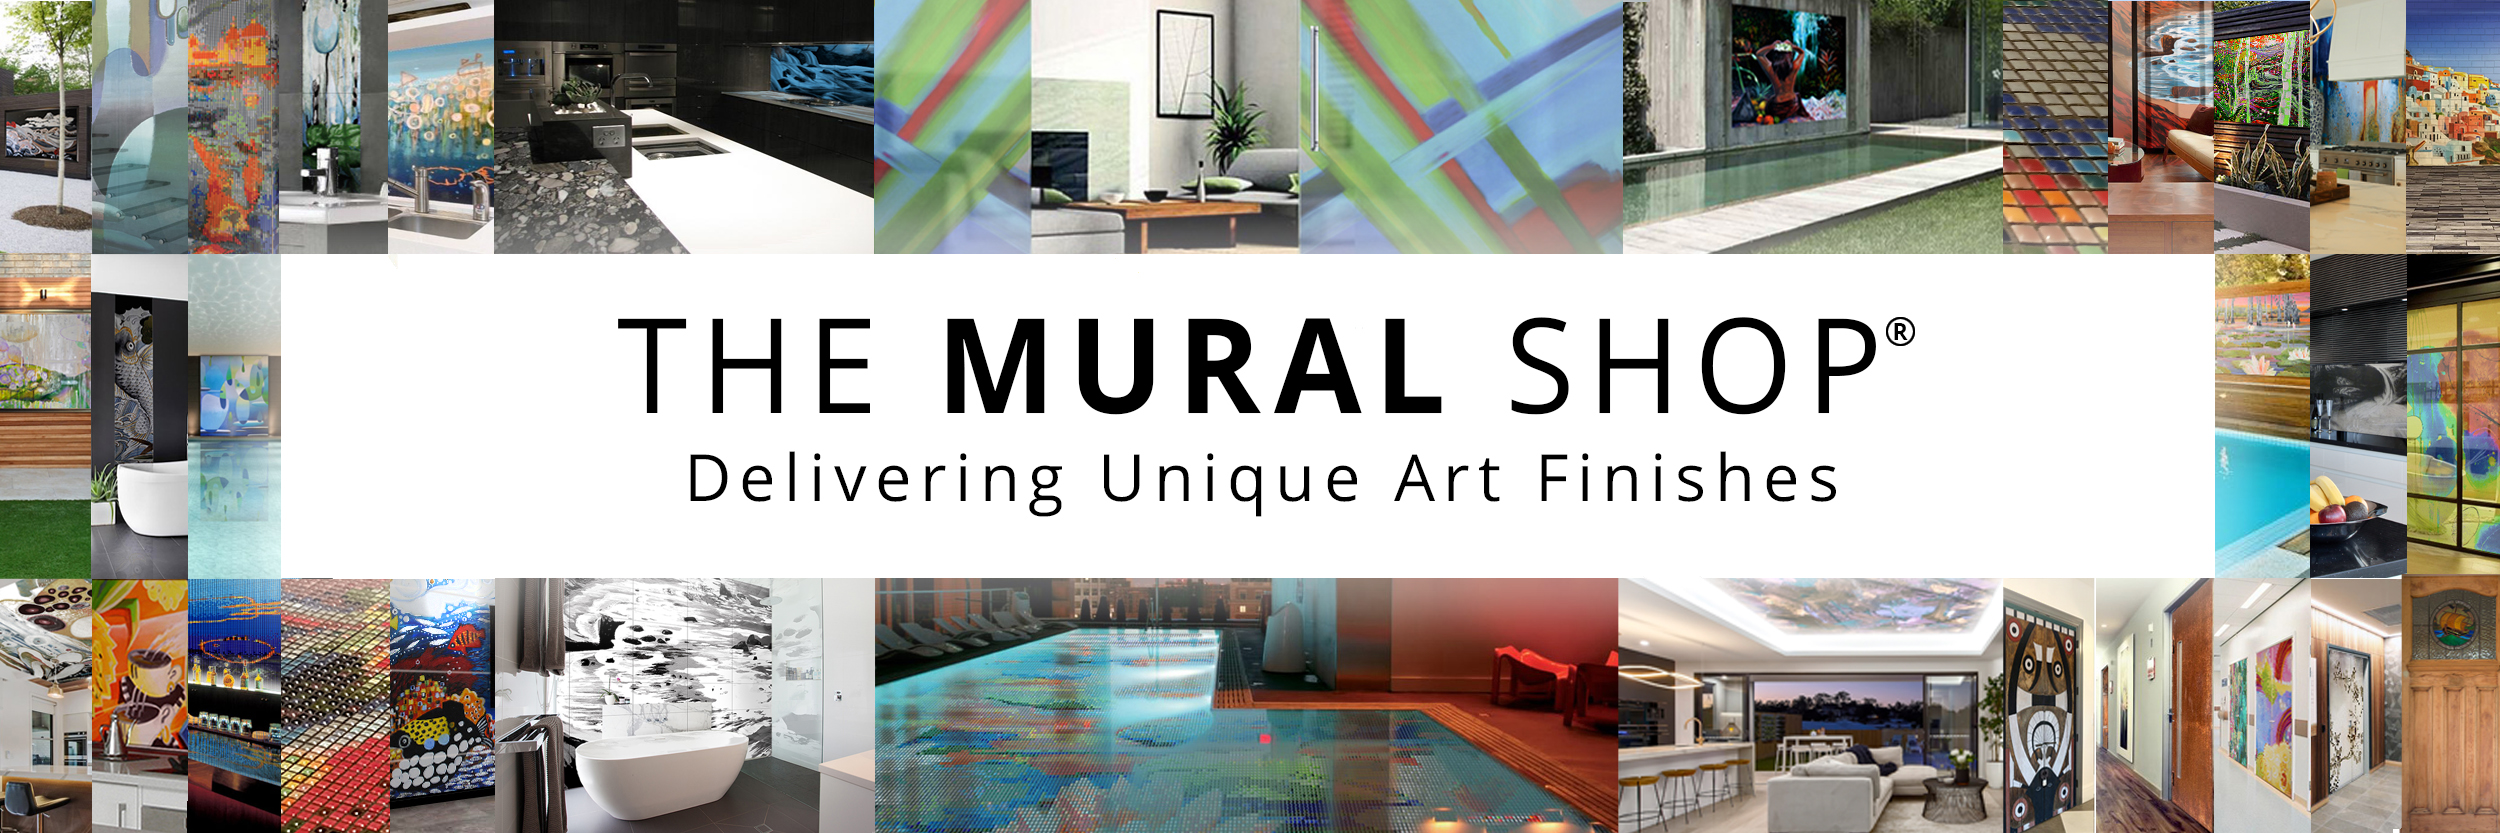 TMS- Delivering unique art finishes home page banner - the - mural - shop